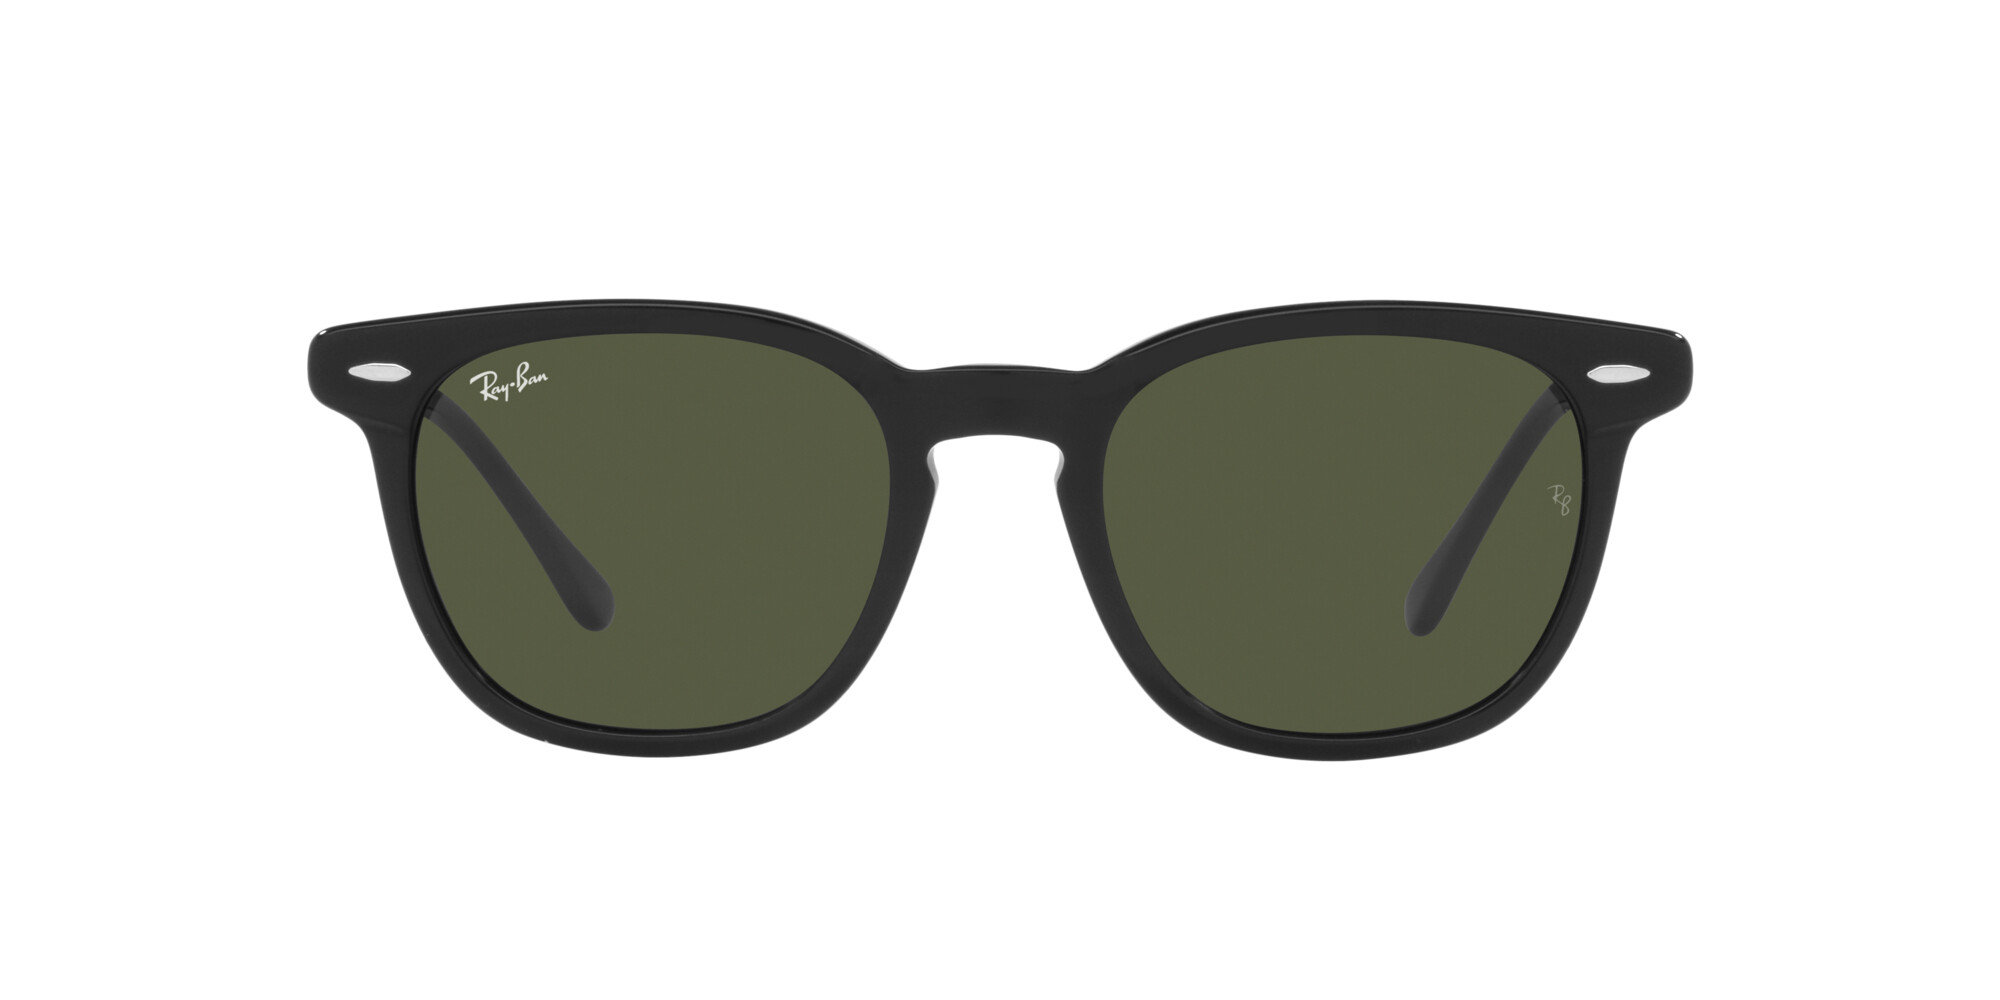 [products.image.front] Ray-Ban HAWKEYE 0RB2298 901/31 Sonnenbrille